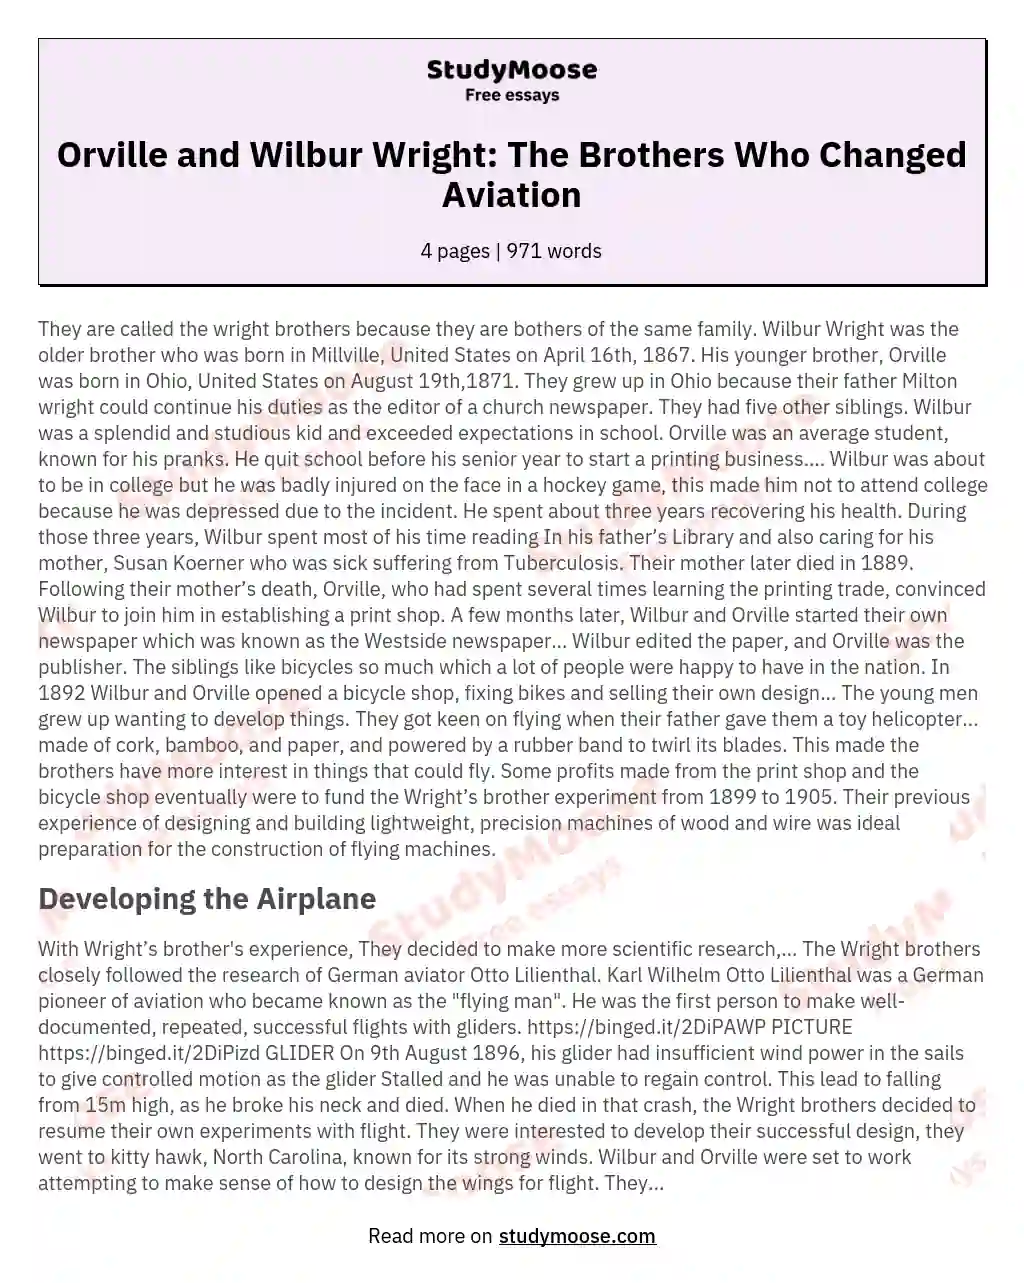 essay on the wright brothers